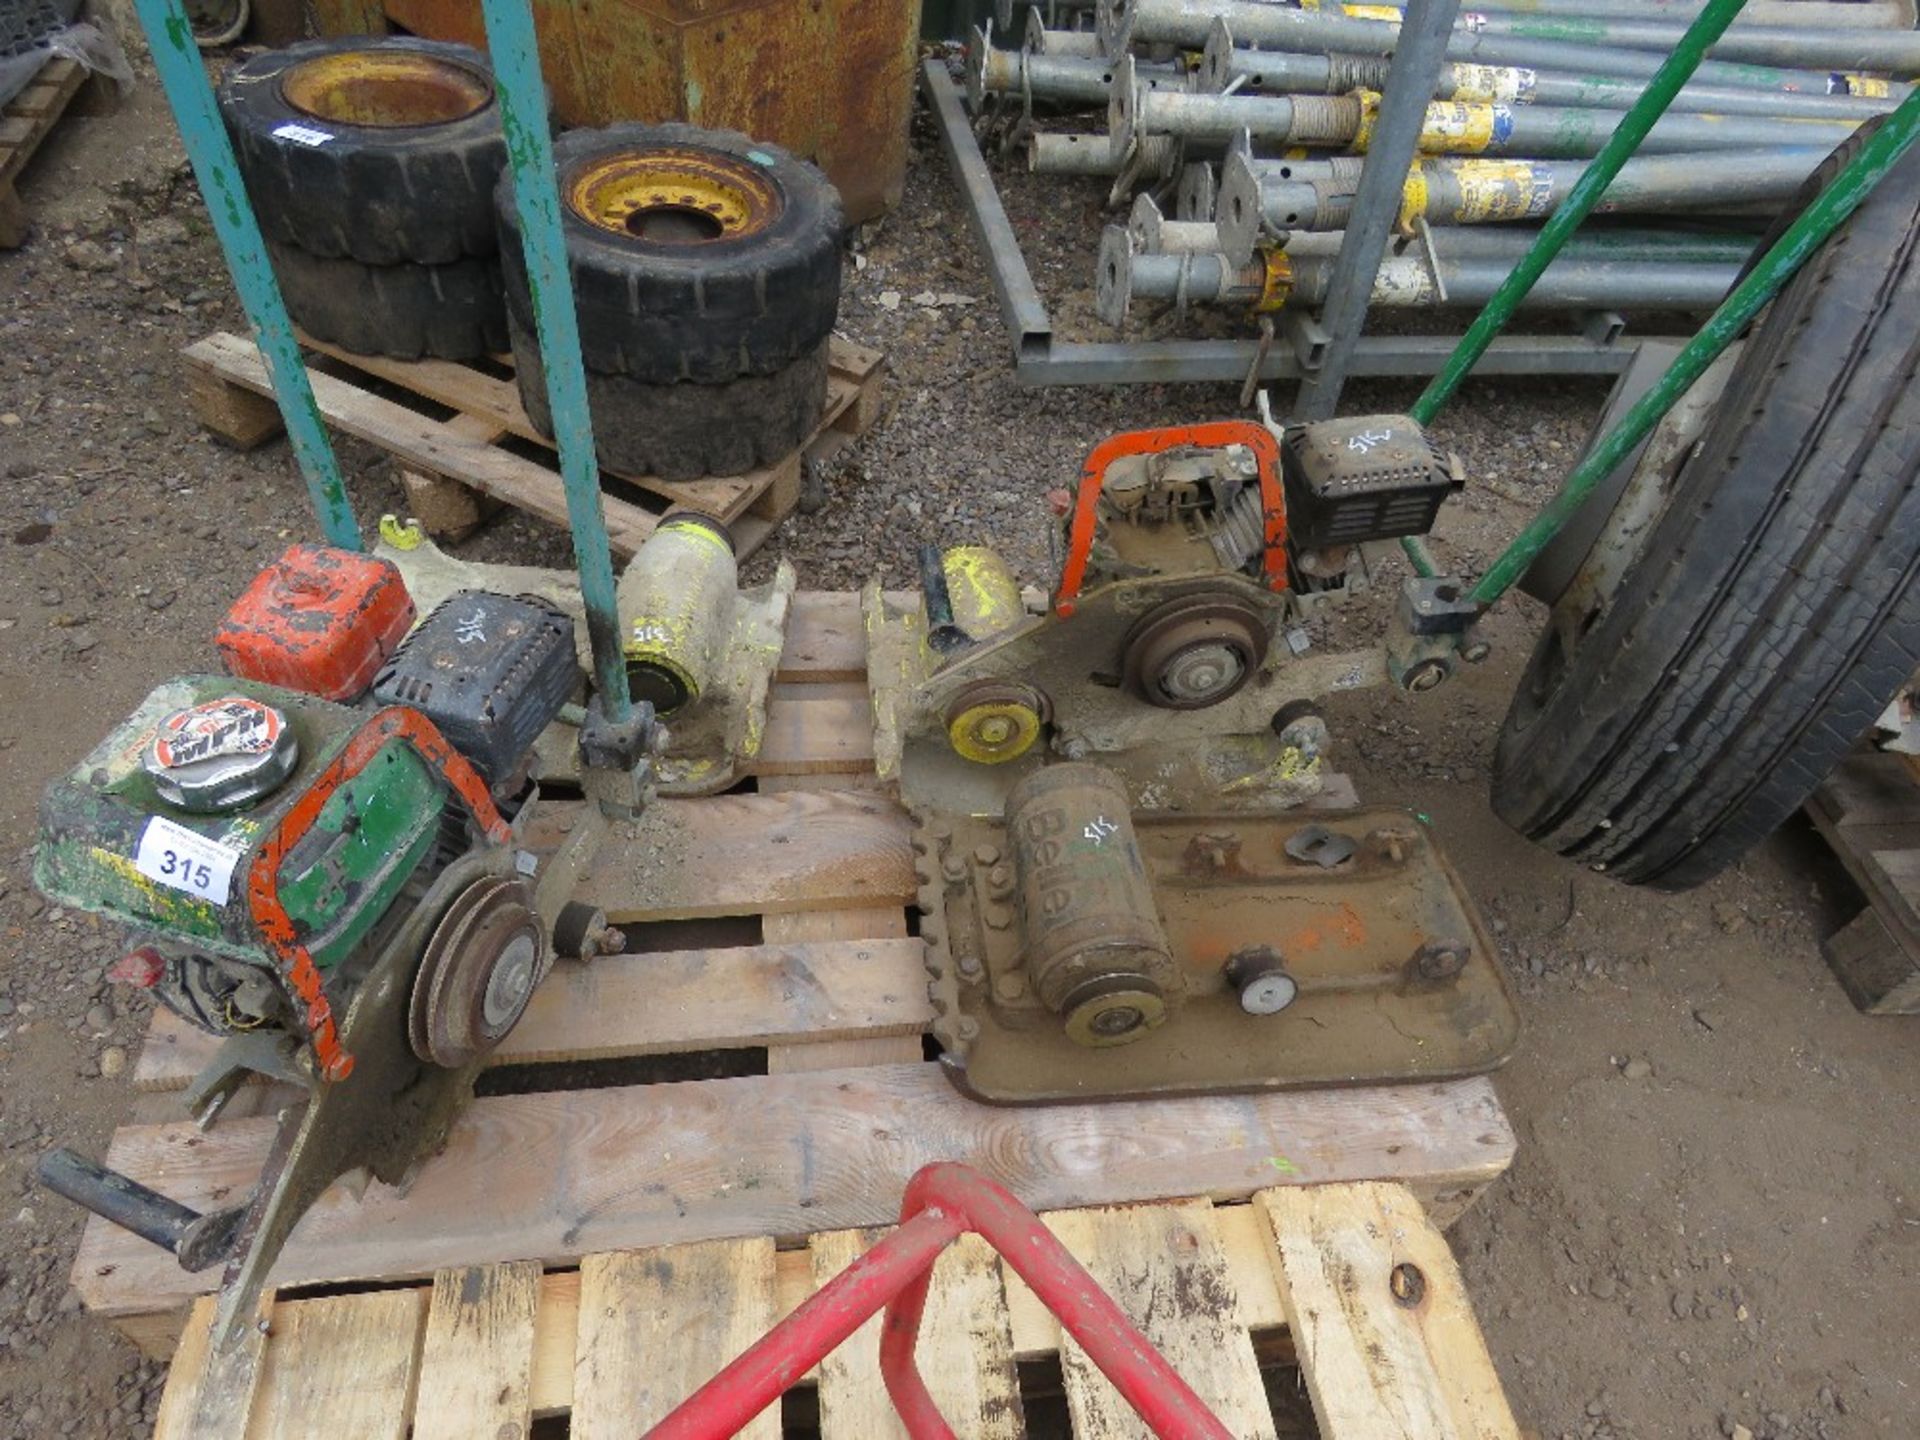 2 X PETROL COMPACTION PLATES FOR SPARES. SOURCED FROM DEPOT CLOSURE.